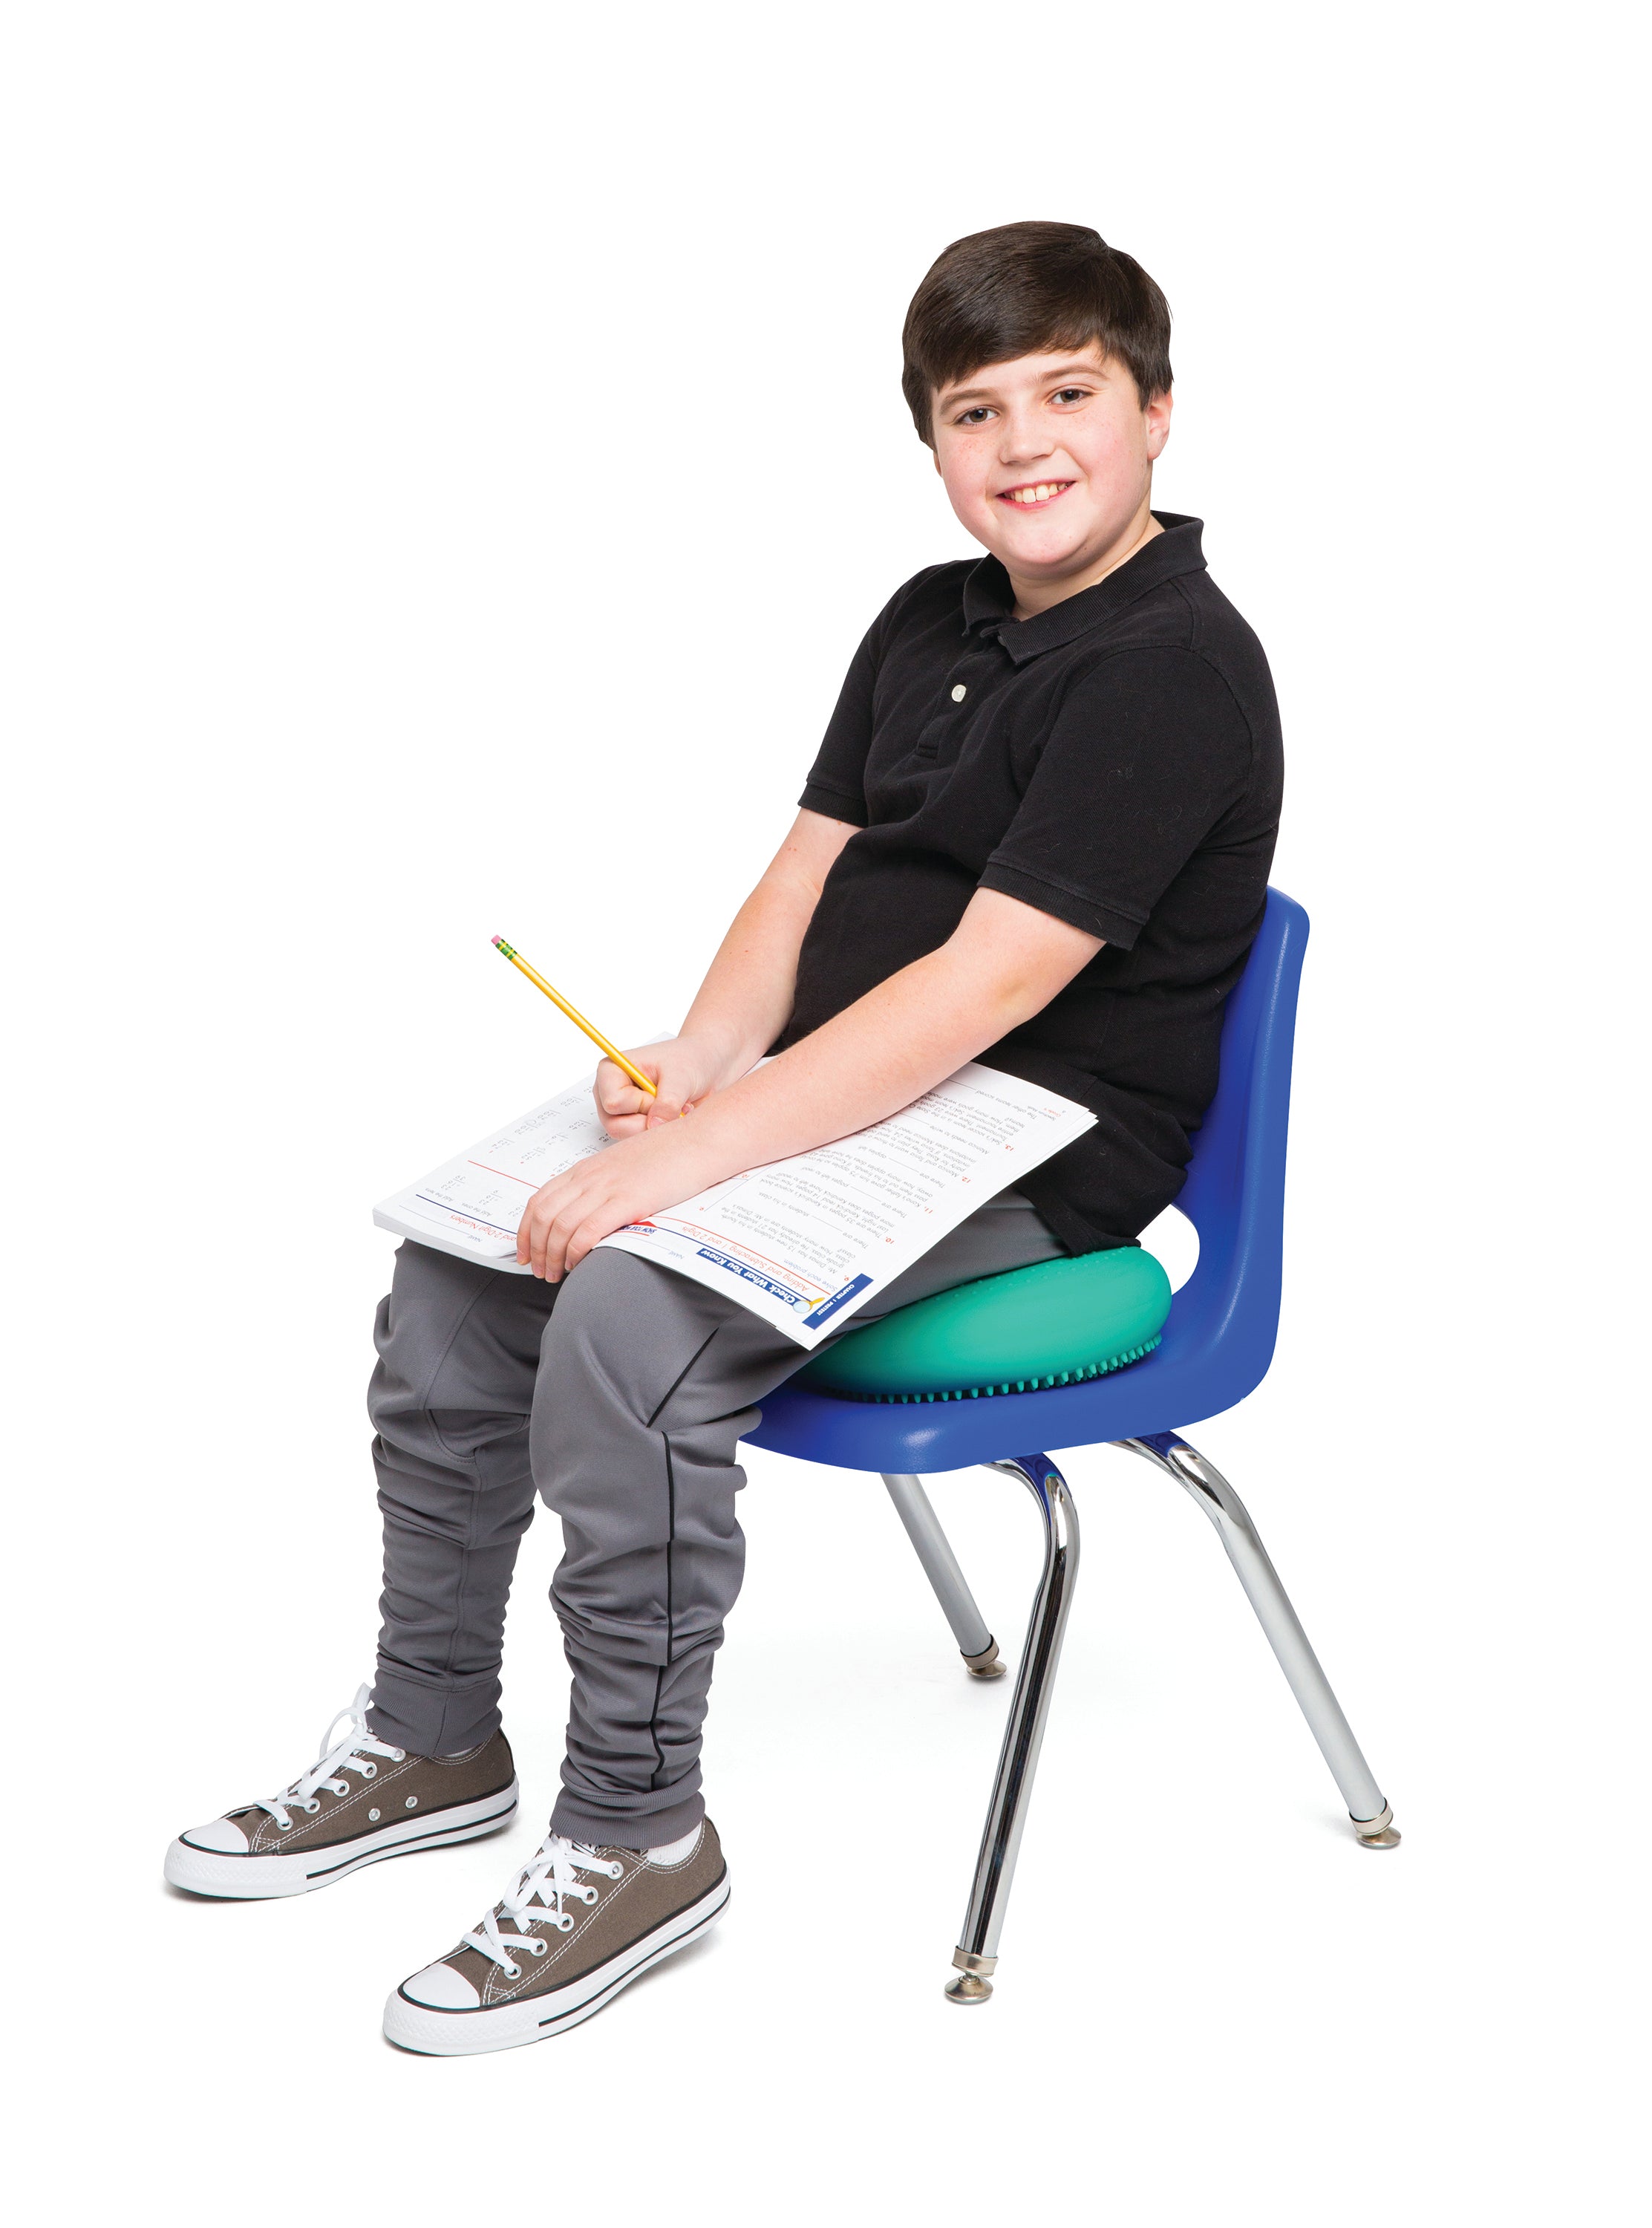 Wiggle Seat Big Sensory Chair Cushion for Elementary/Middle/High School  Kids by Bouncyband®